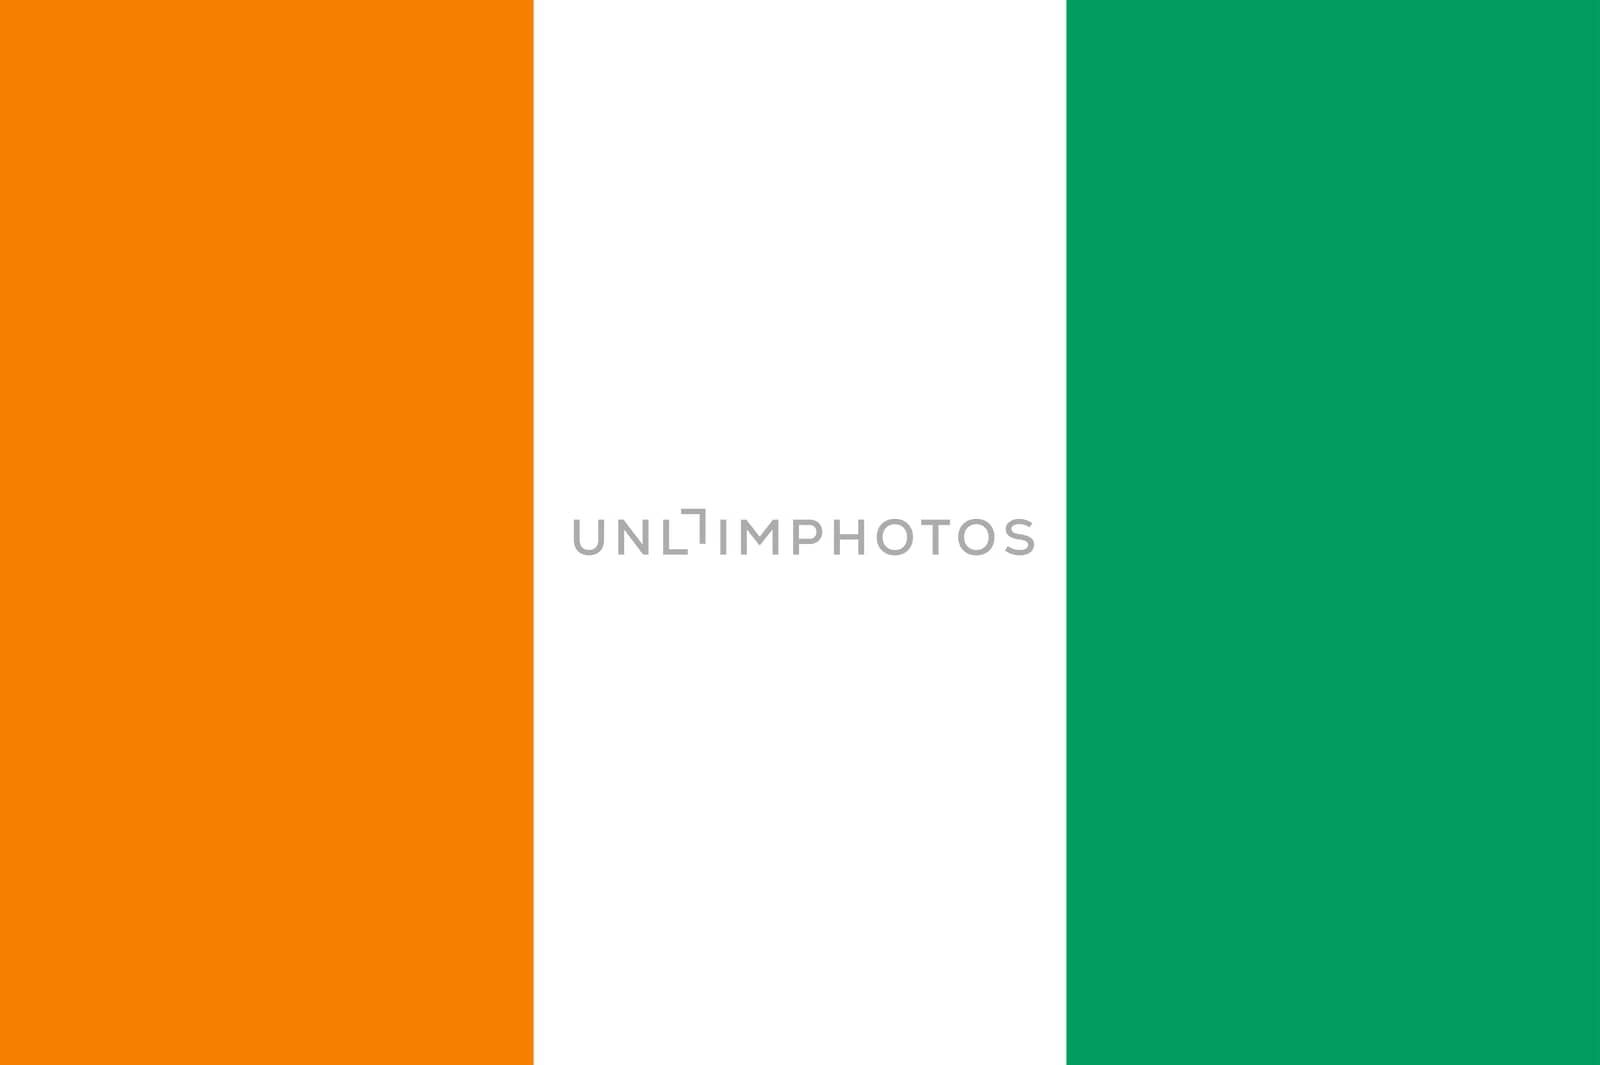 The flag of the African country of  Ivory Coast